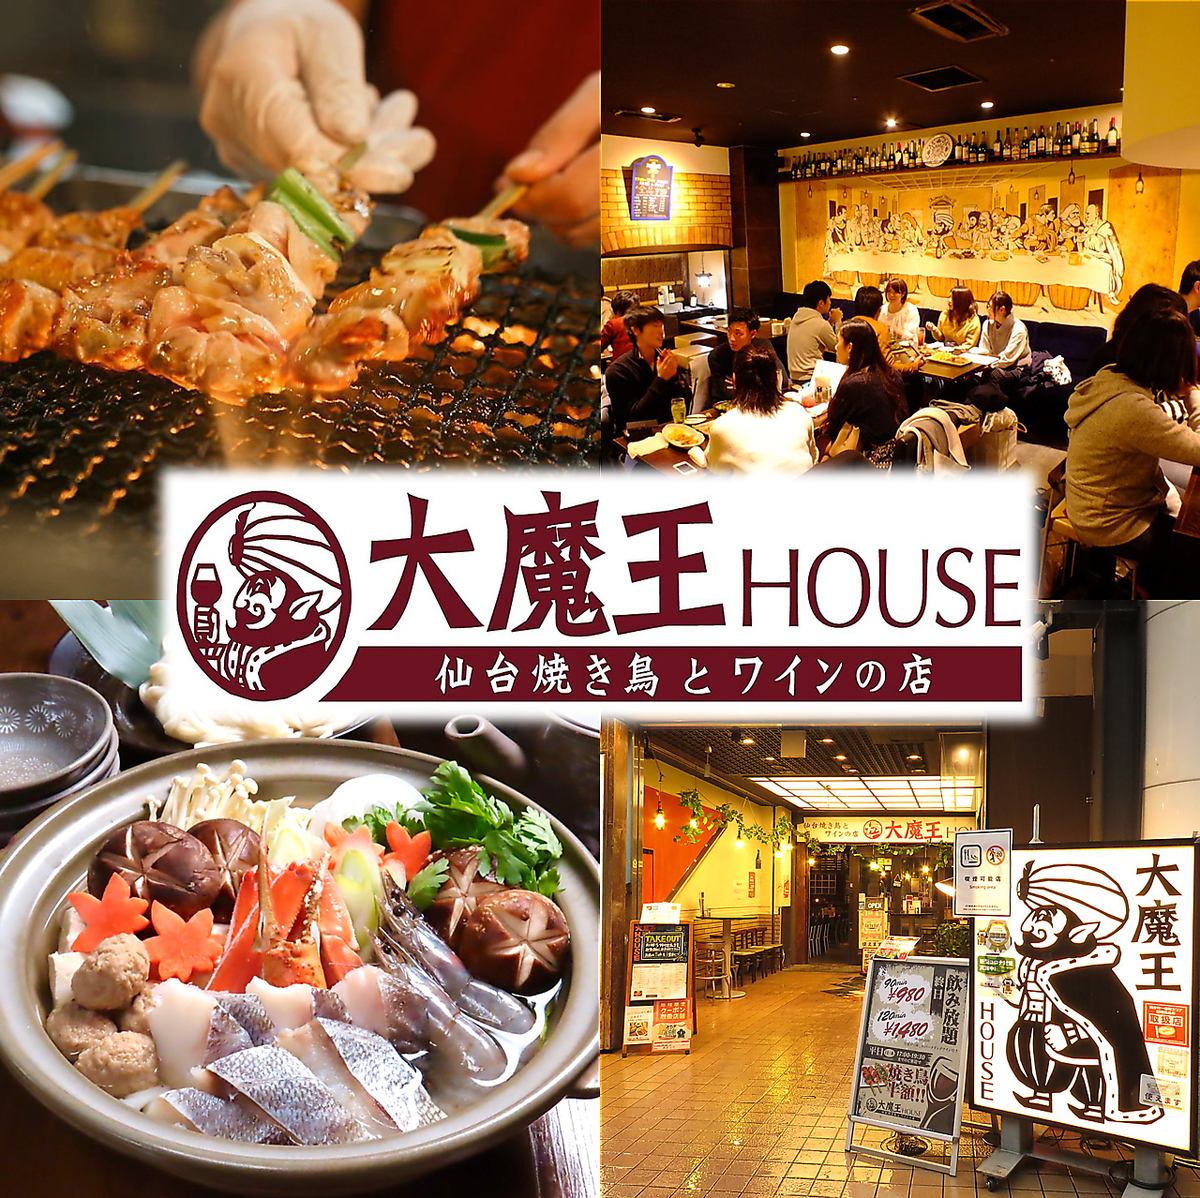 Enjoy a welcome and farewell party with a luxurious seafood hotpot in a convenient location, 1 minute walk from the entrance of Kokubuncho.